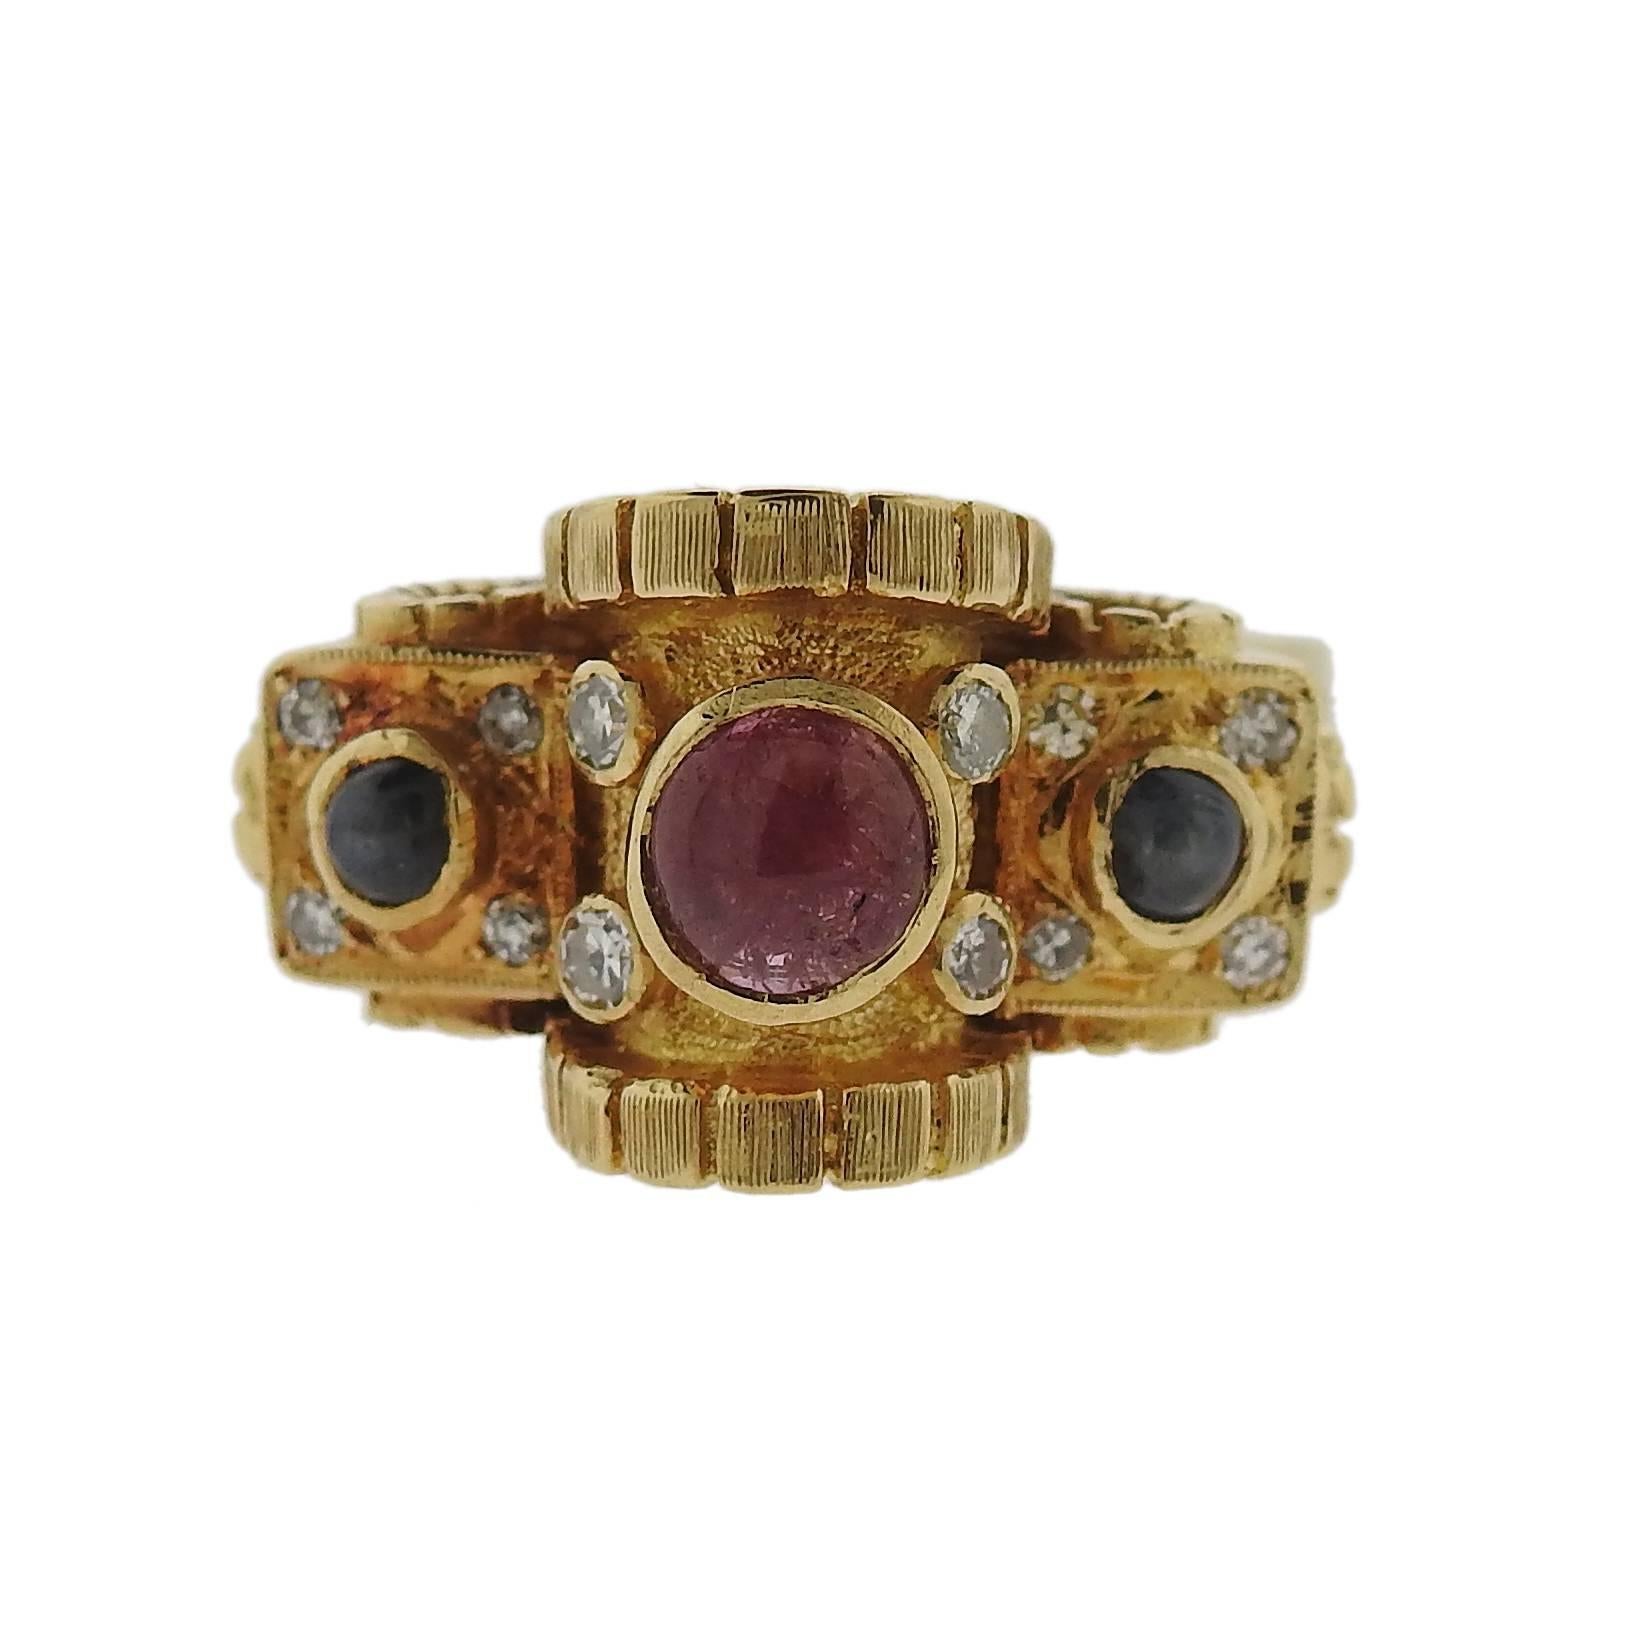 An 18k yellow gold ring, crafted by Greek designer Ilias Lalaounis, decorated with tourmaline cabochons, surrounded with diamonds. Ring is a size 6 1/2, ring top sits approx. 16mm from the top of the finger, measures 13mm x 20mm.  Marked with